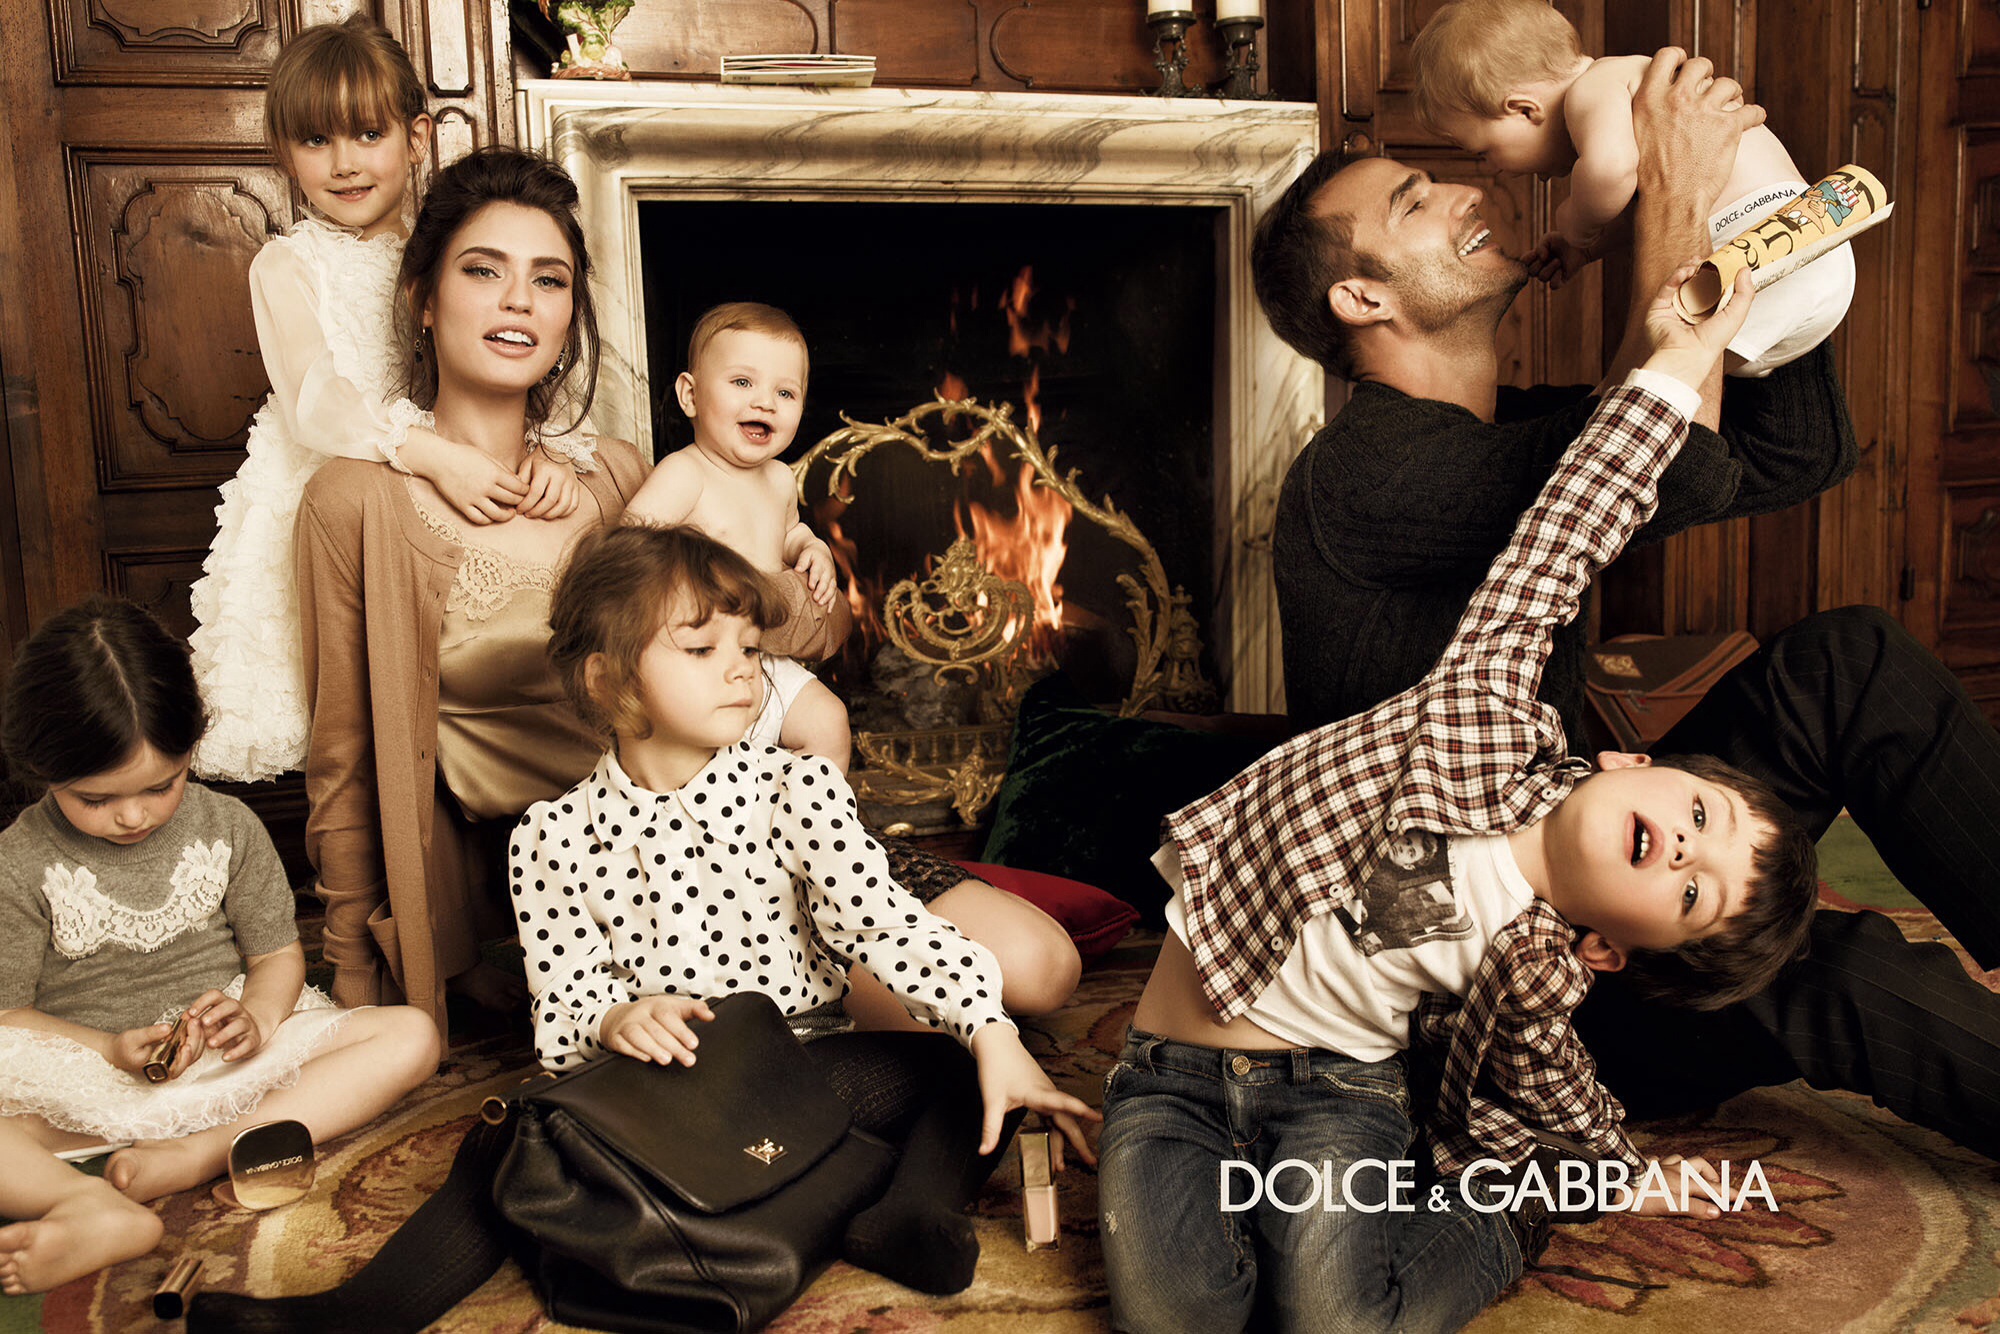 Dolce & Gabbana and Our Right to Freedom of Opinion